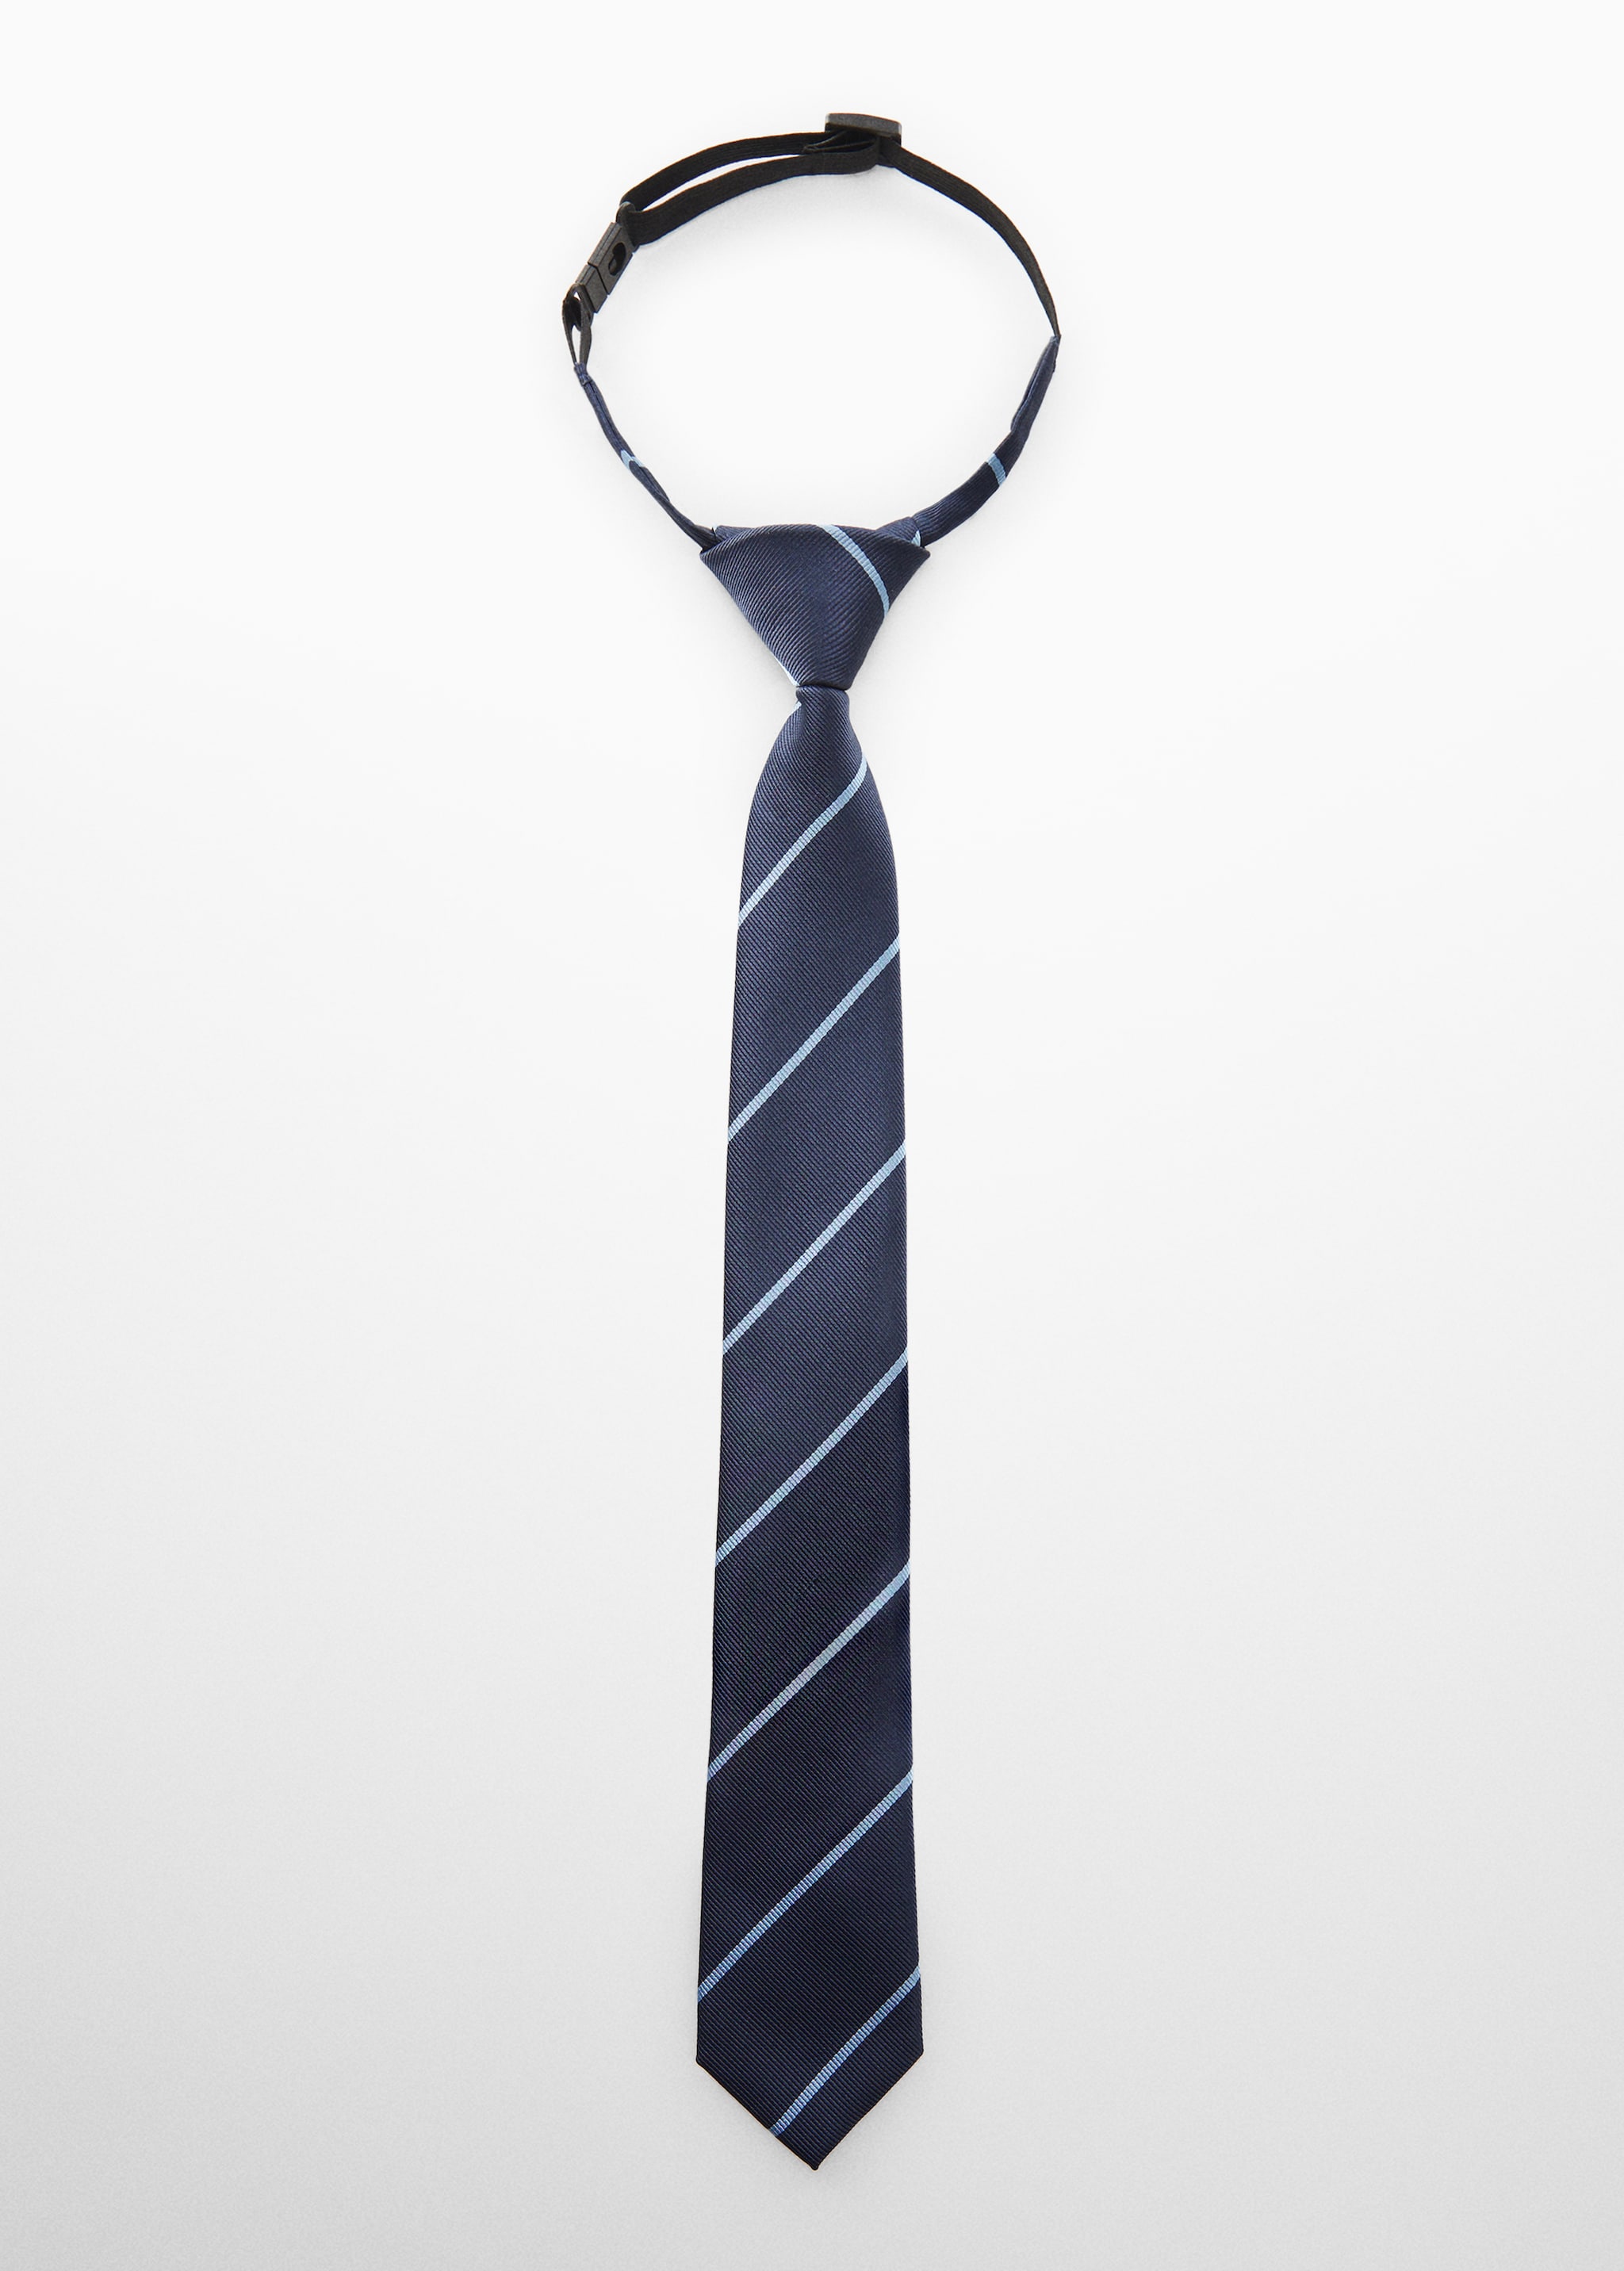 Striped tie - Article without model